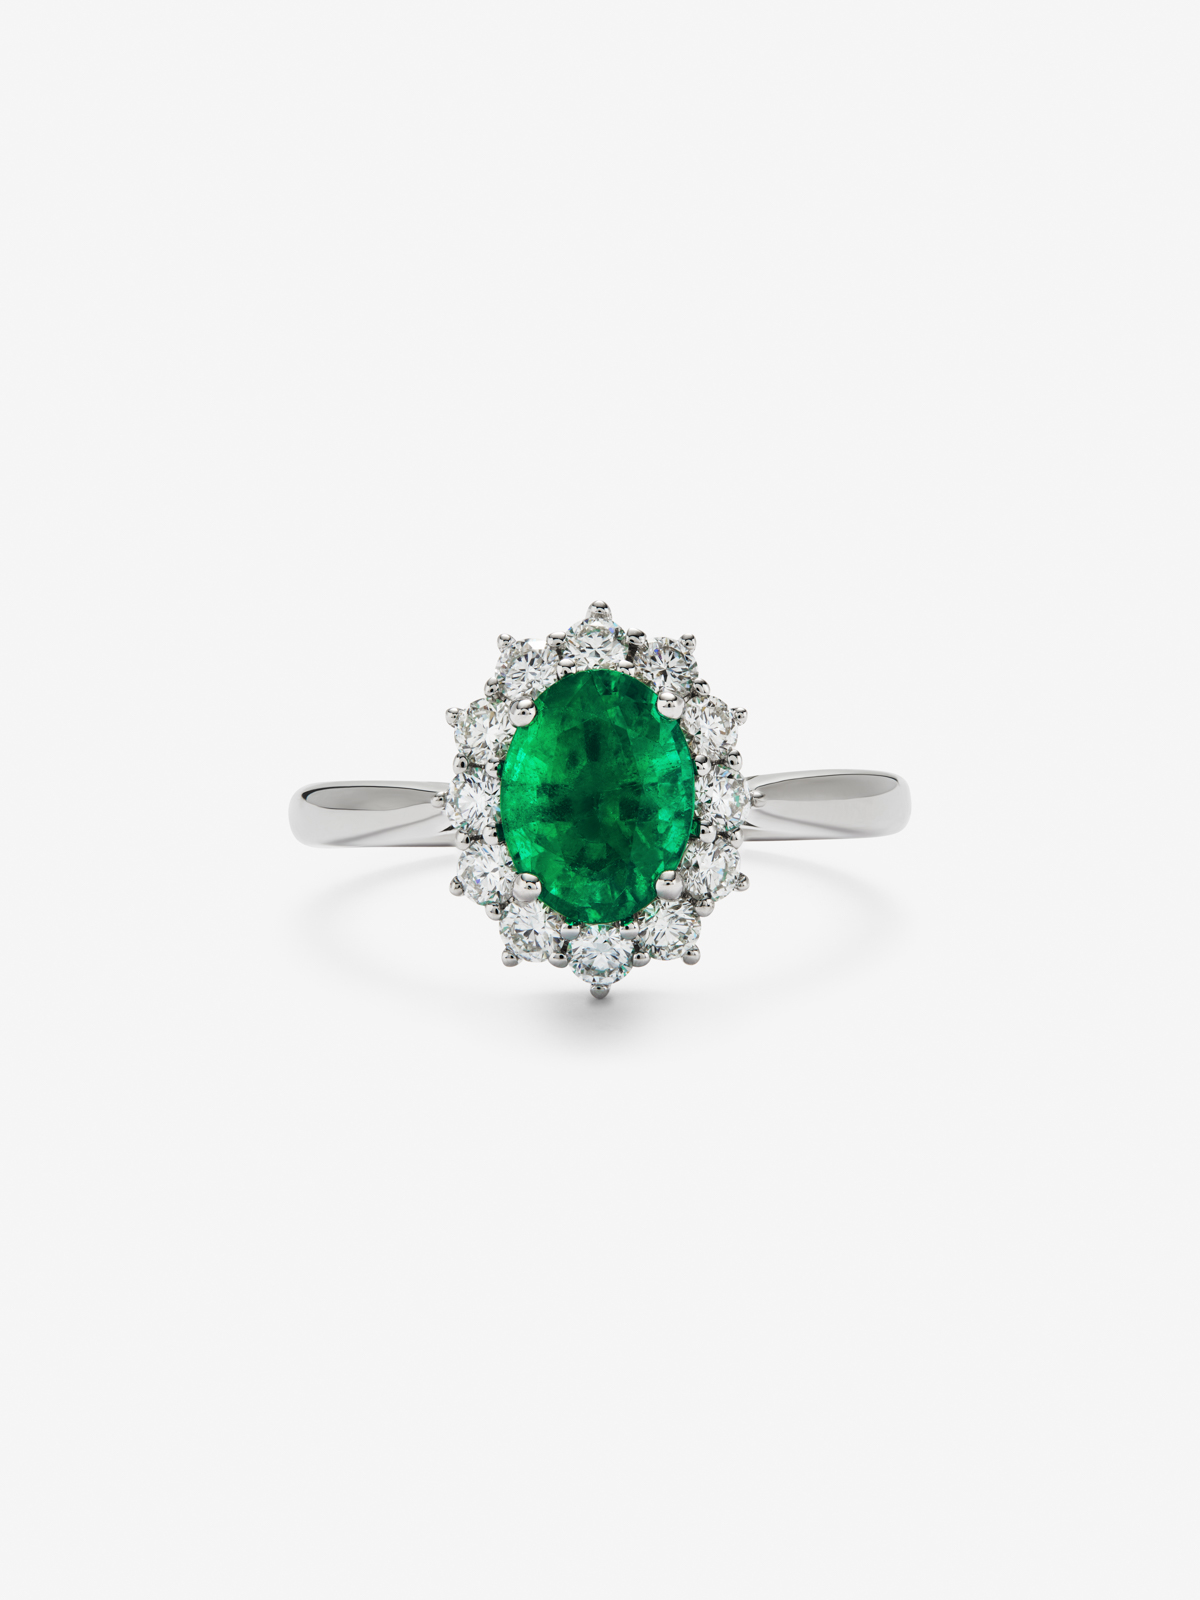 18K white gold ring with oval-cut green emerald of 1.42 cts and 12 brilliant-cut diamonds with a total of 0.45 cts